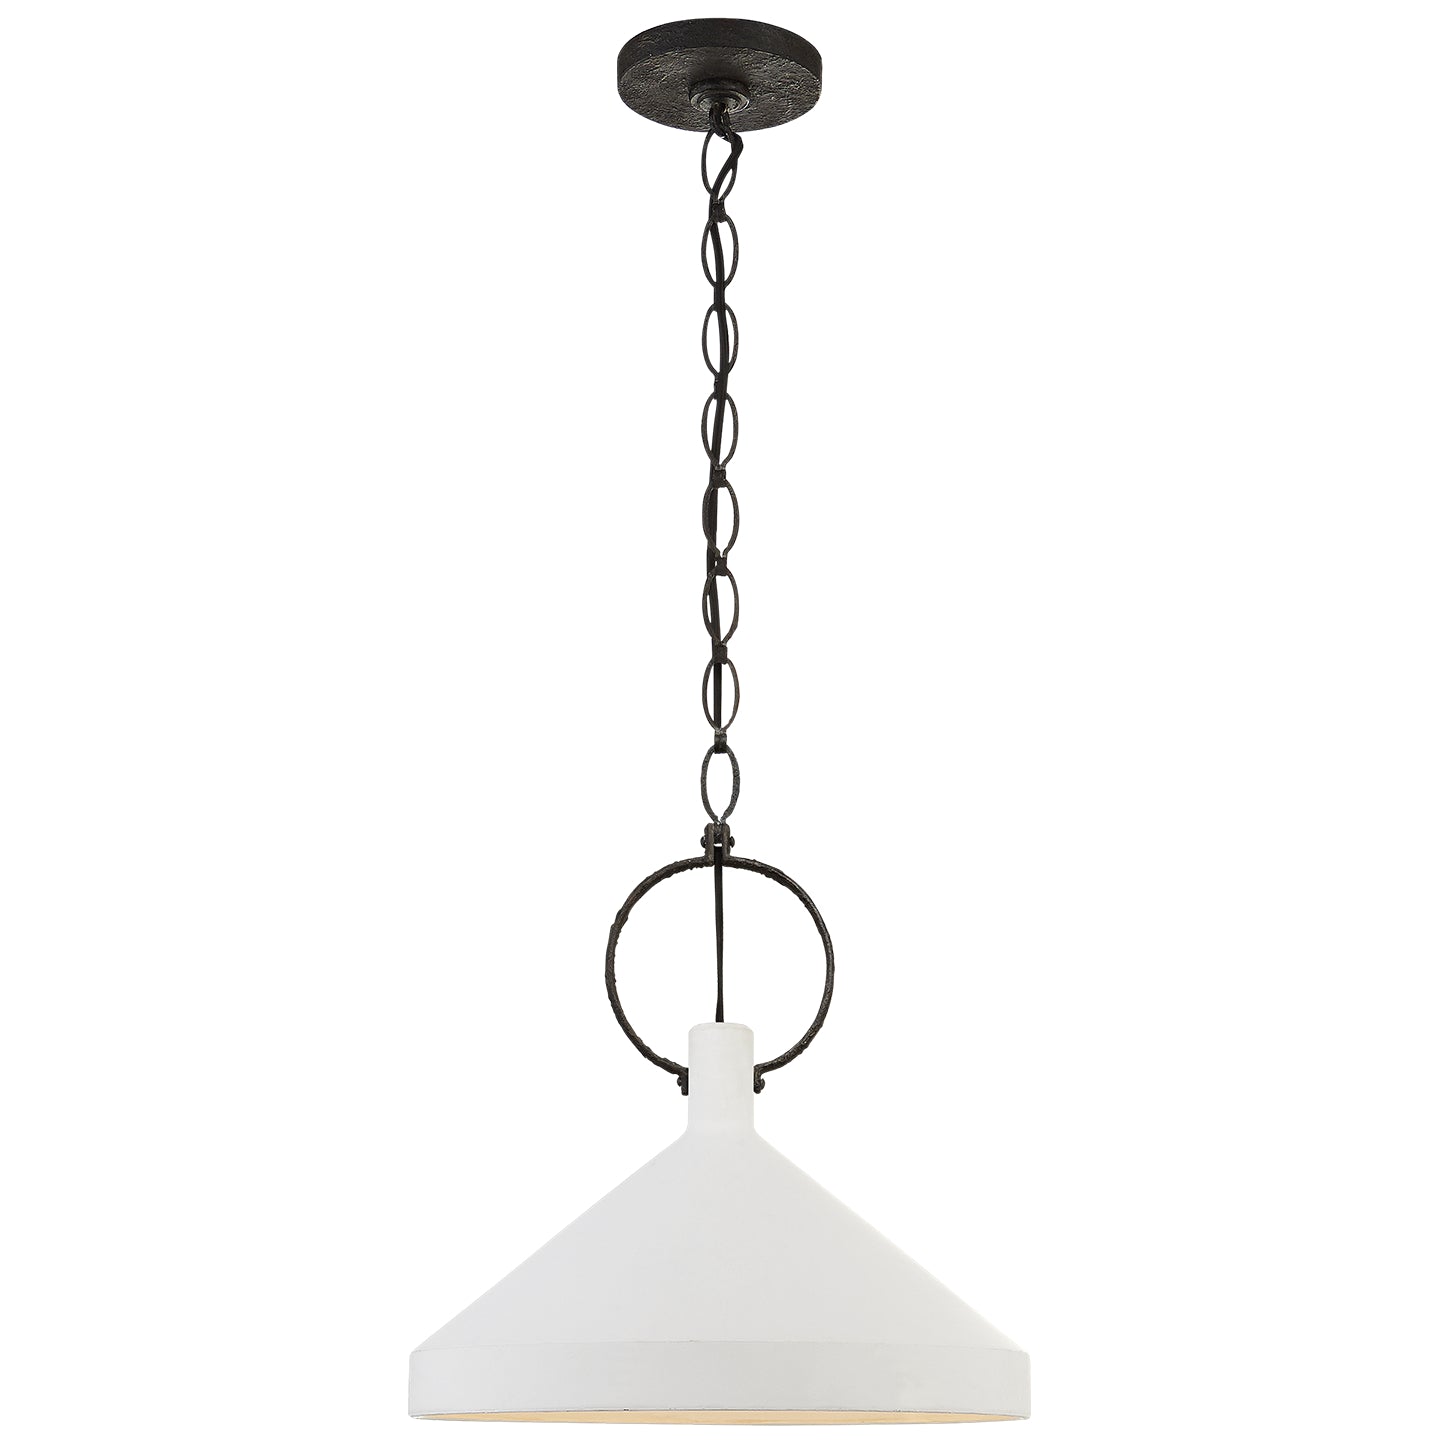 Load image into Gallery viewer, Visual Comfort Signature - SK 5363NR-PW - One Light Pendant - Limoges - Natural Rusted Iron
